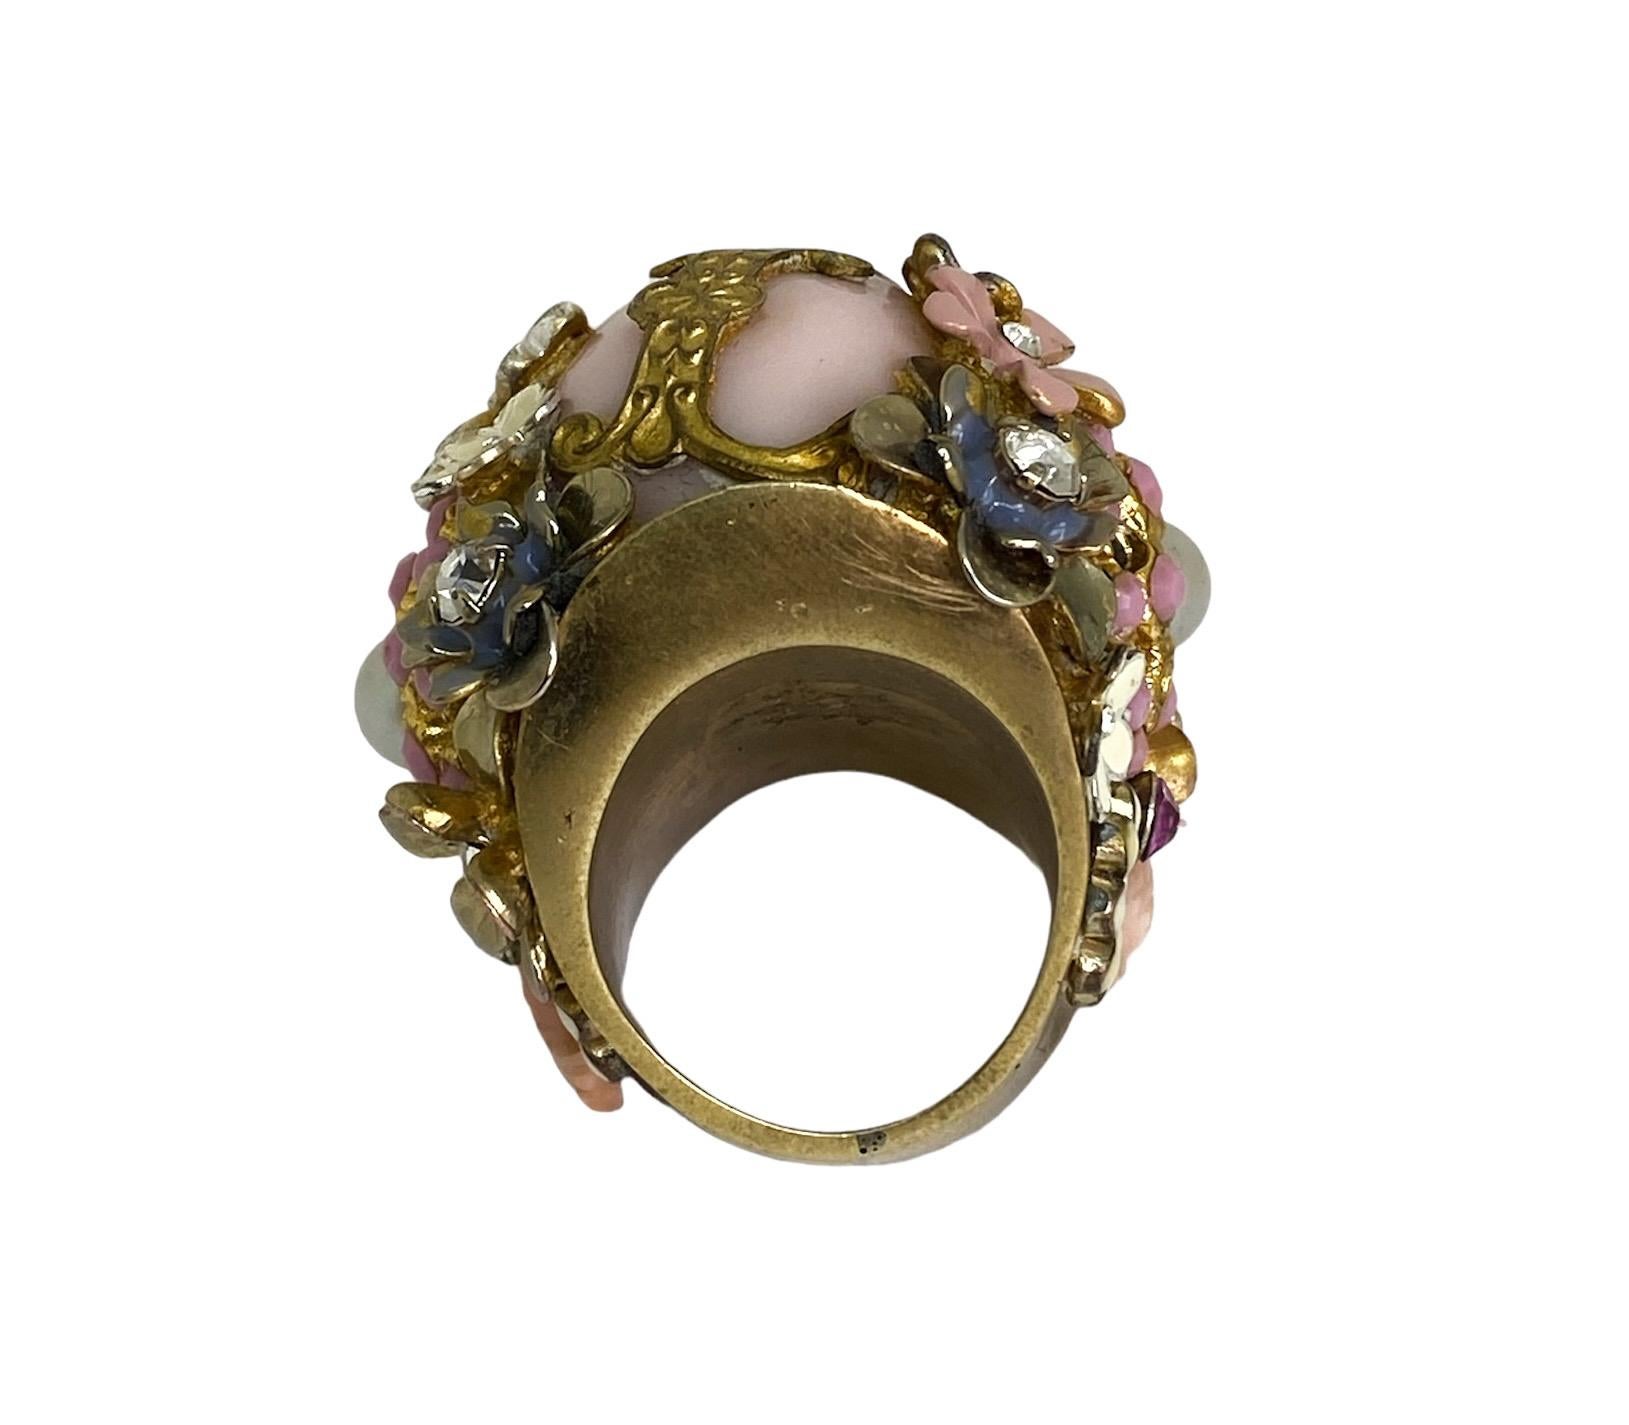 Women's One Off Ring. Handmade & High Upcycling. Bronze, Resin & Vintage Elements. 18mm. For Sale